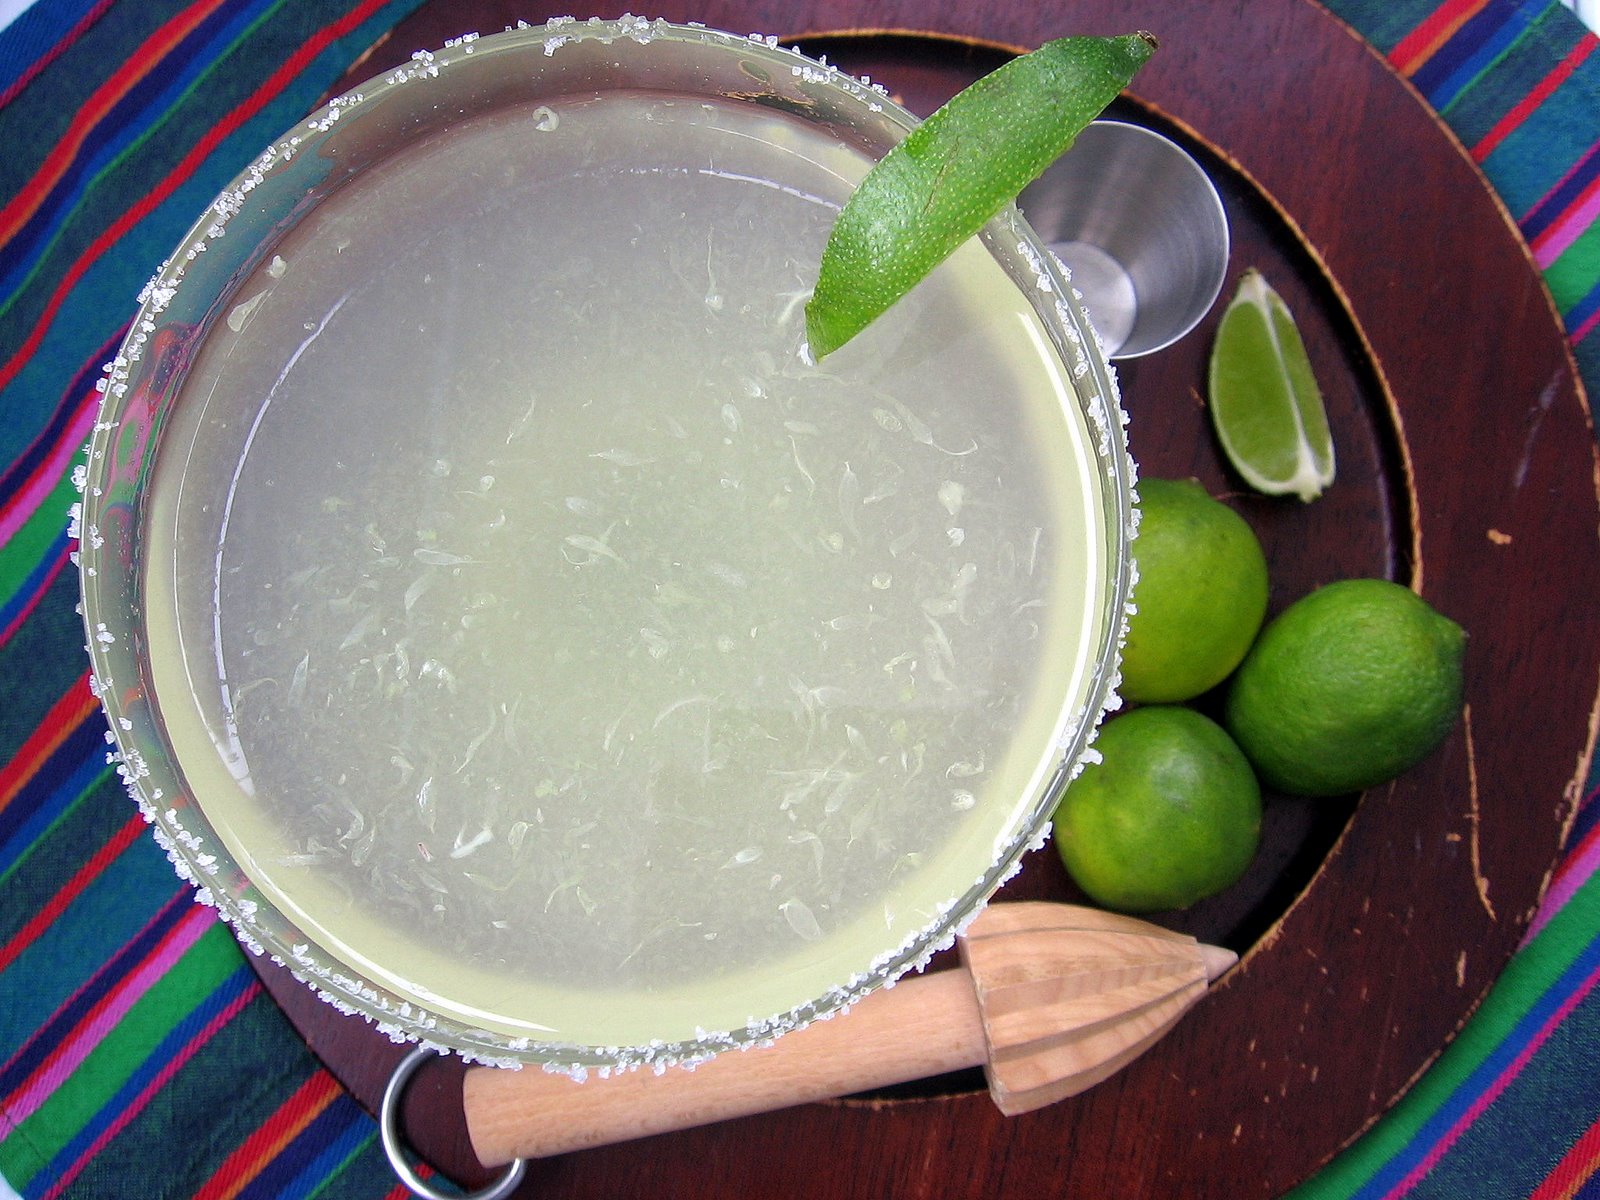 Toasting with Margaritas